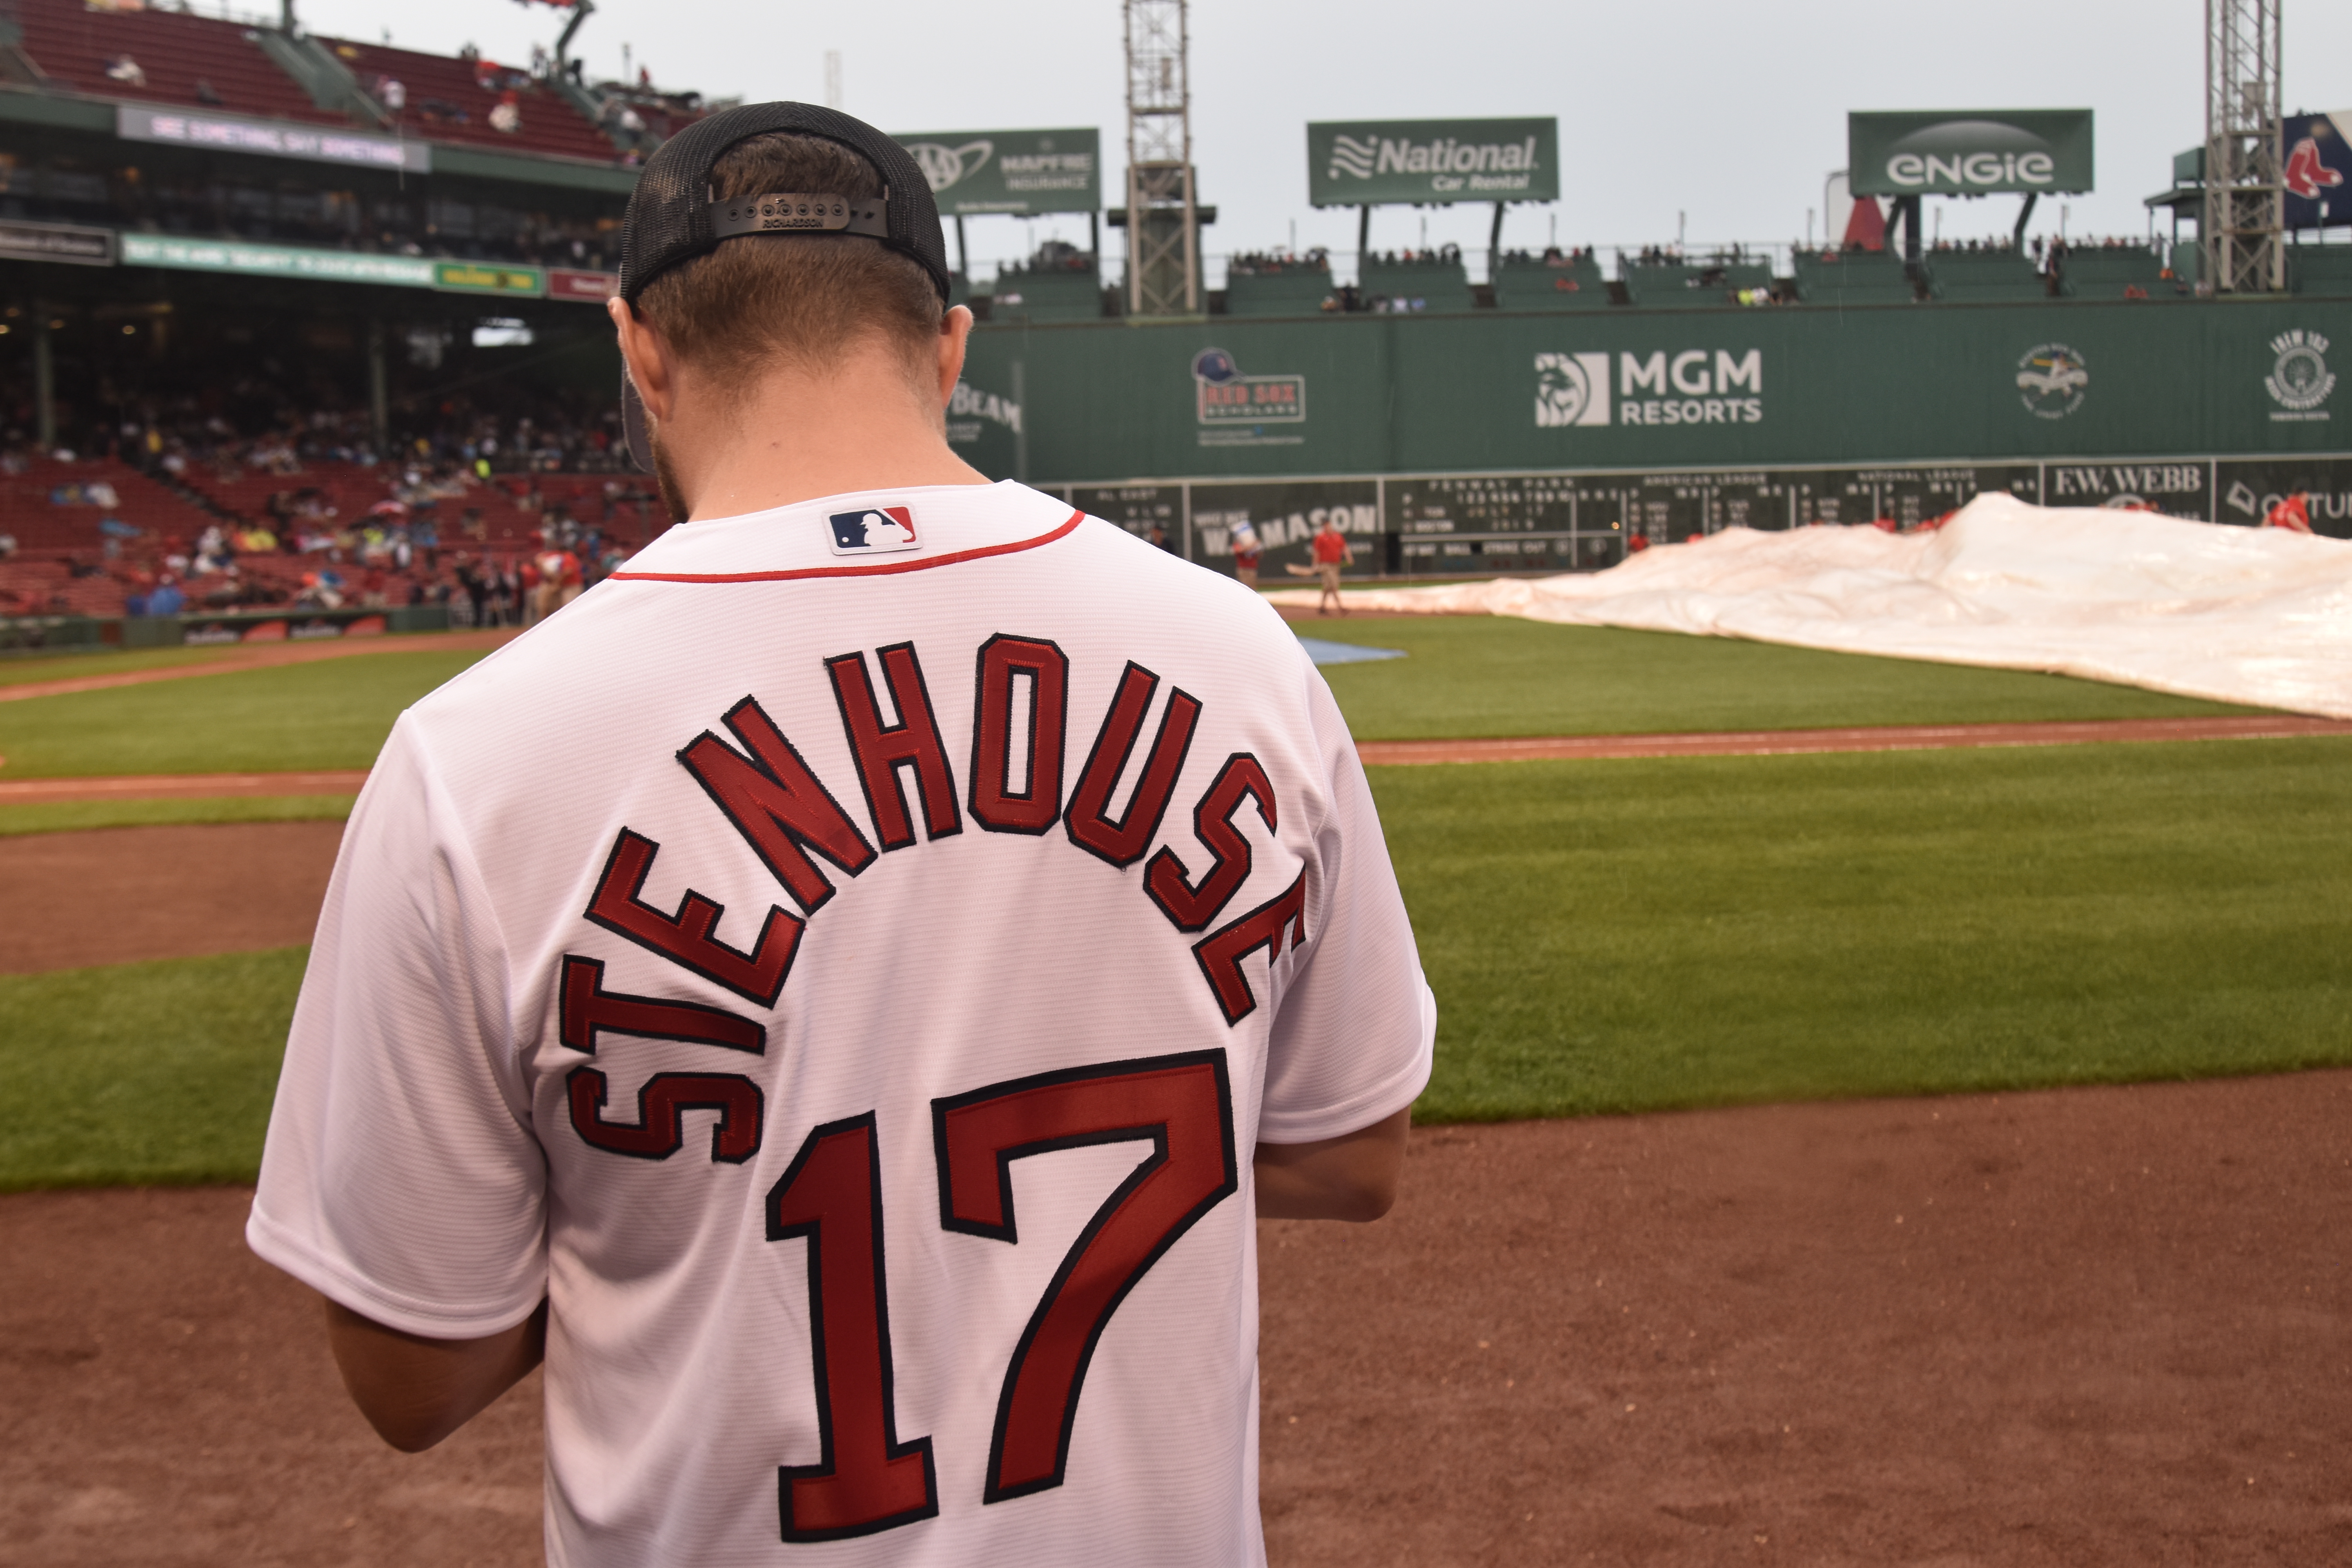 Memorable Moments: Stenhouse’s First Pitch